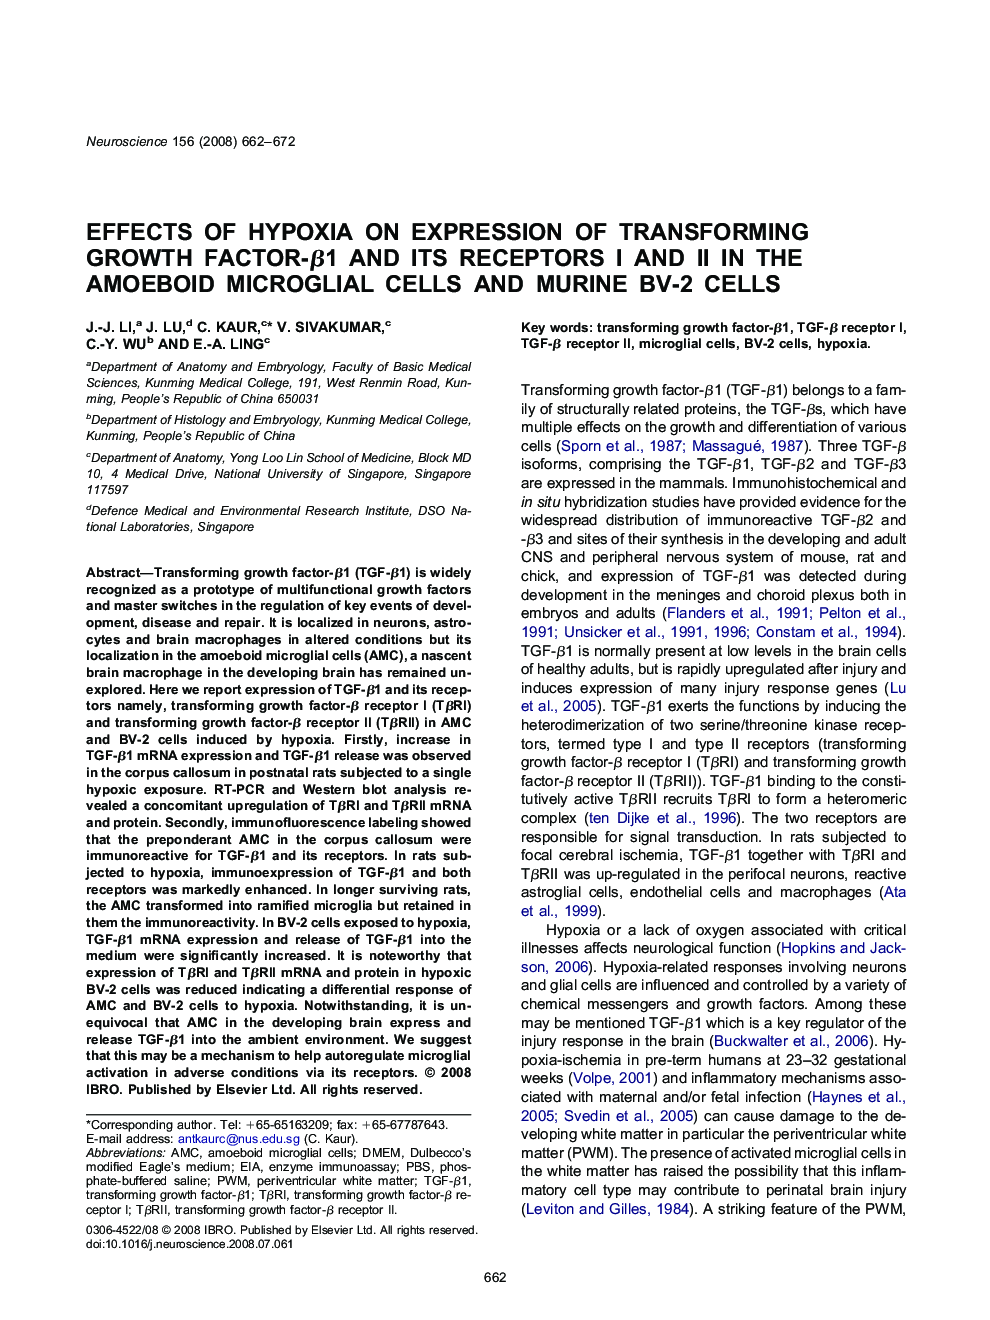 Effects of hypoxia on expression of transforming growth factor-β1 and its receptors I and II in the amoeboid microglial cells and murine BV-2 cells